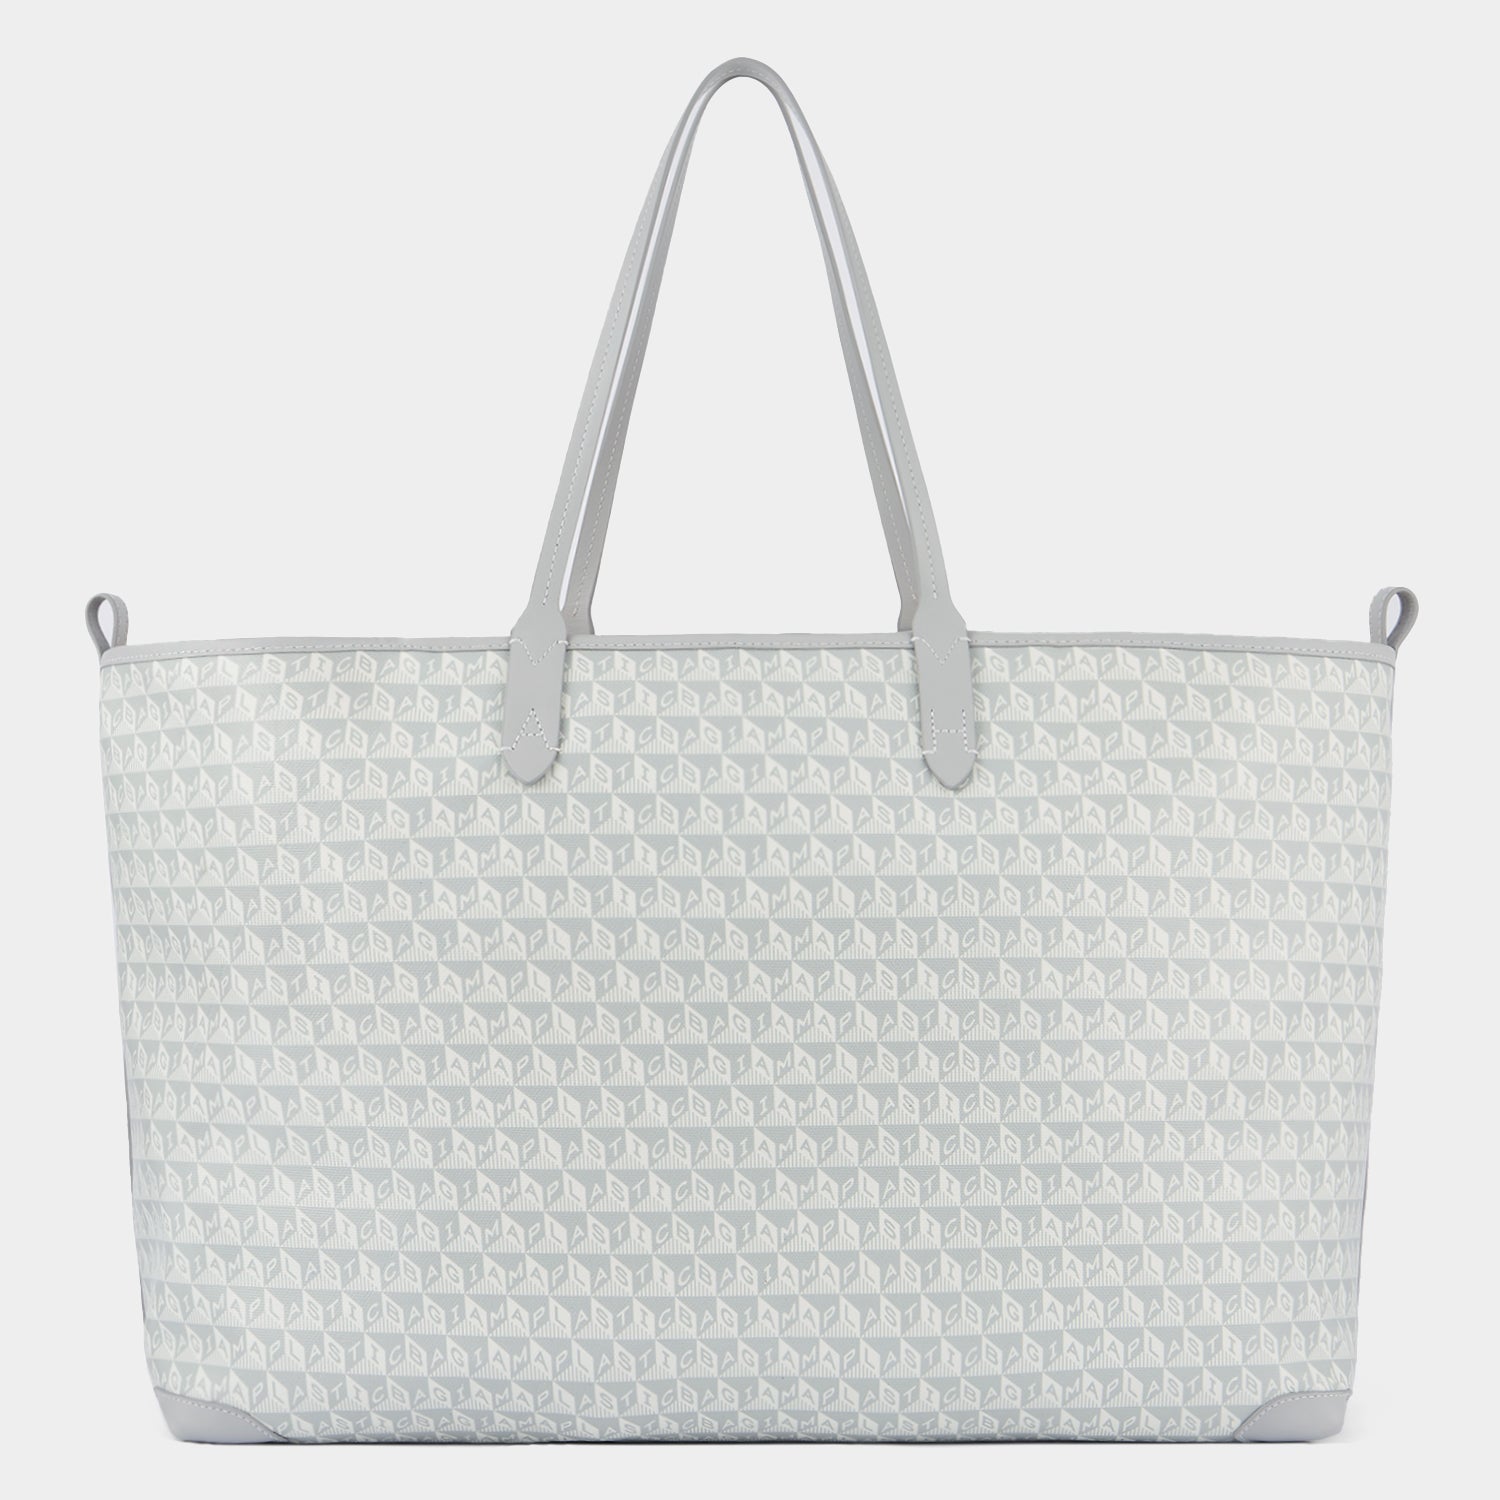 「I AM A Plastic Bag」 XL ウィンク トート -

                  
                    Recycled Coated Canvas in Frost -
                  

                  Anya Hindmarch JP
